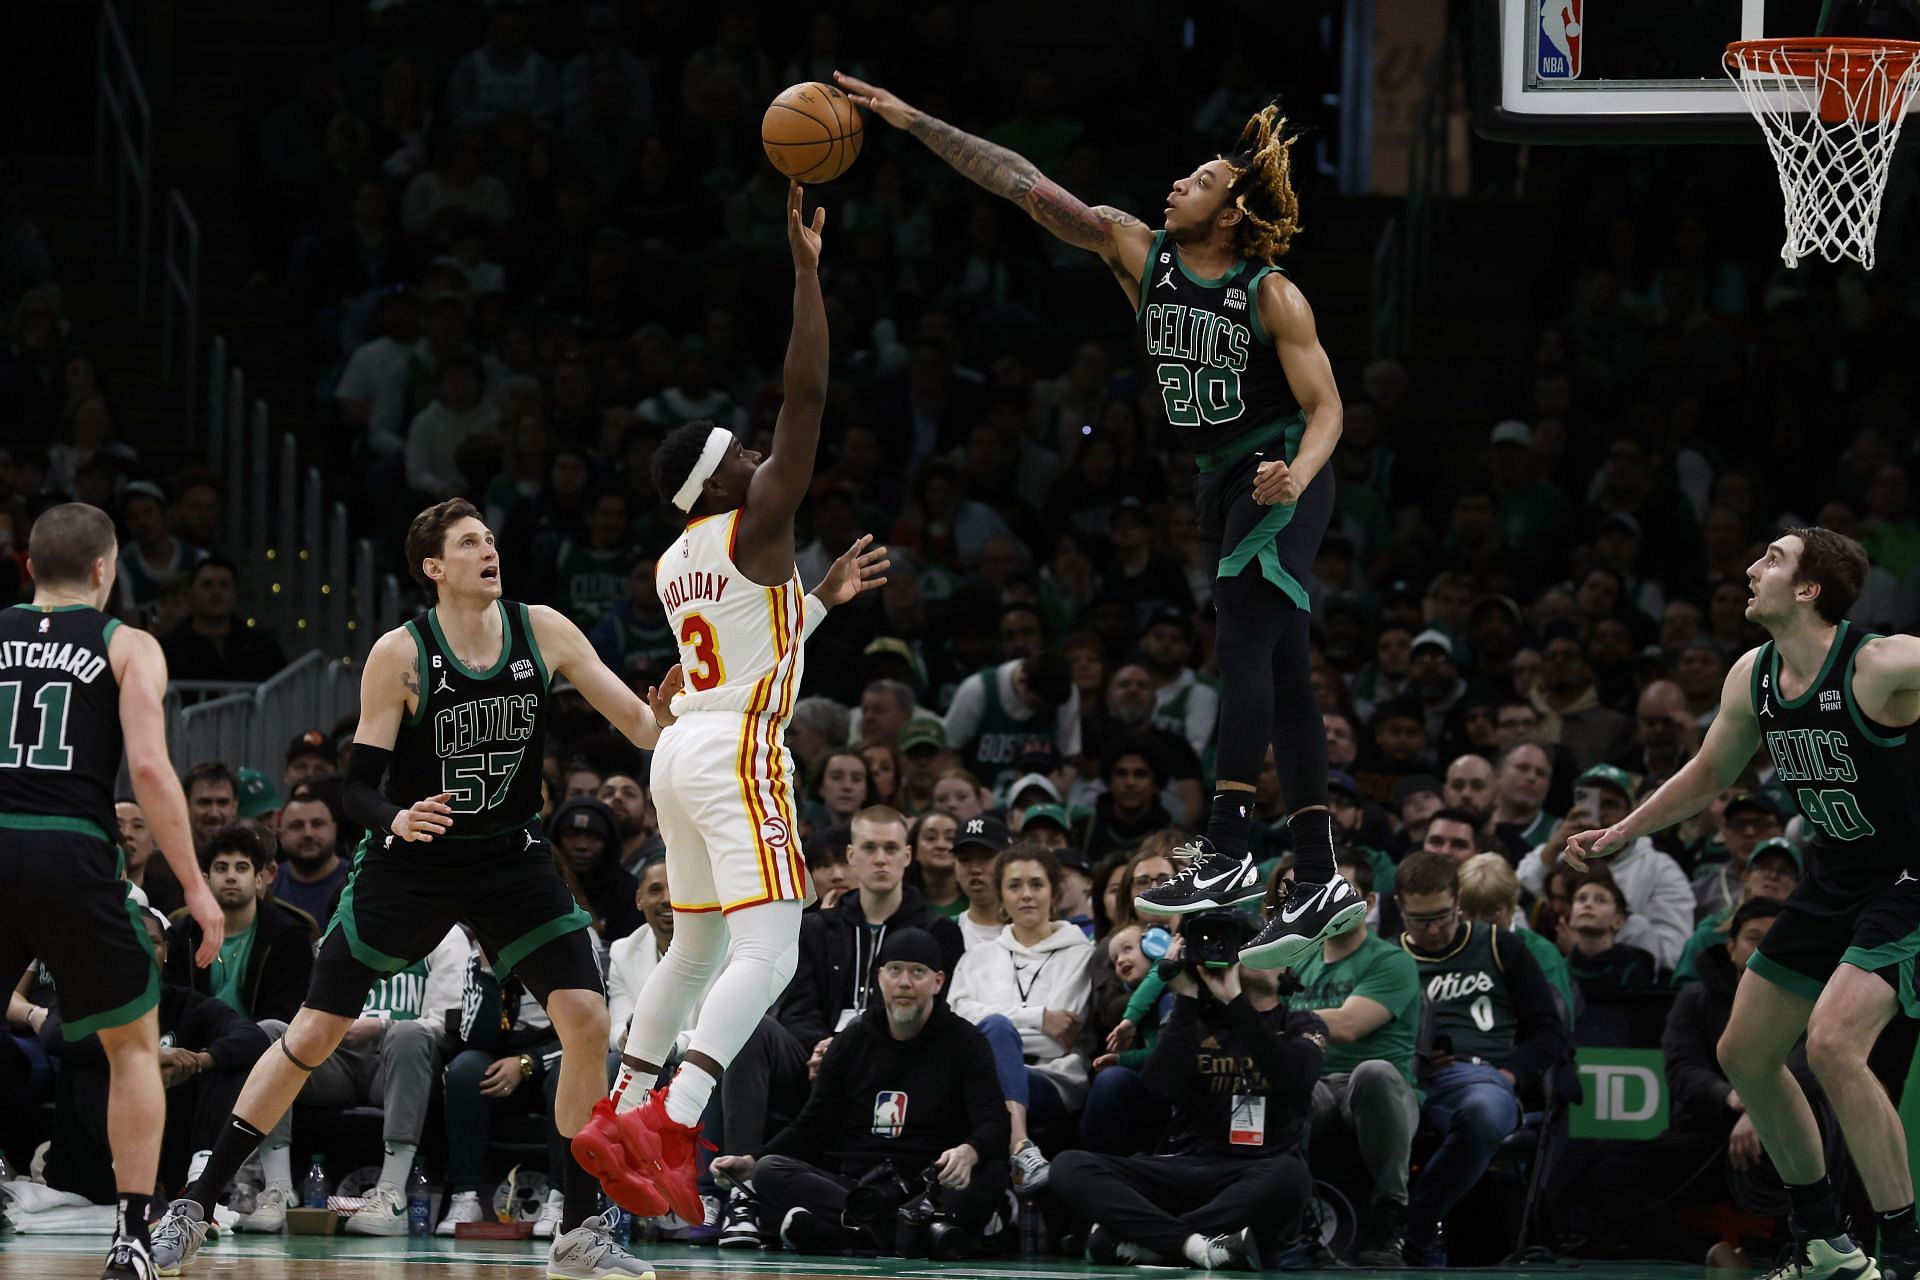 Miami Heat vs. Boston Celtics NBA Summer League 2023 (8th July, 2023):  Preview, prediction, players to watch, rosters and more